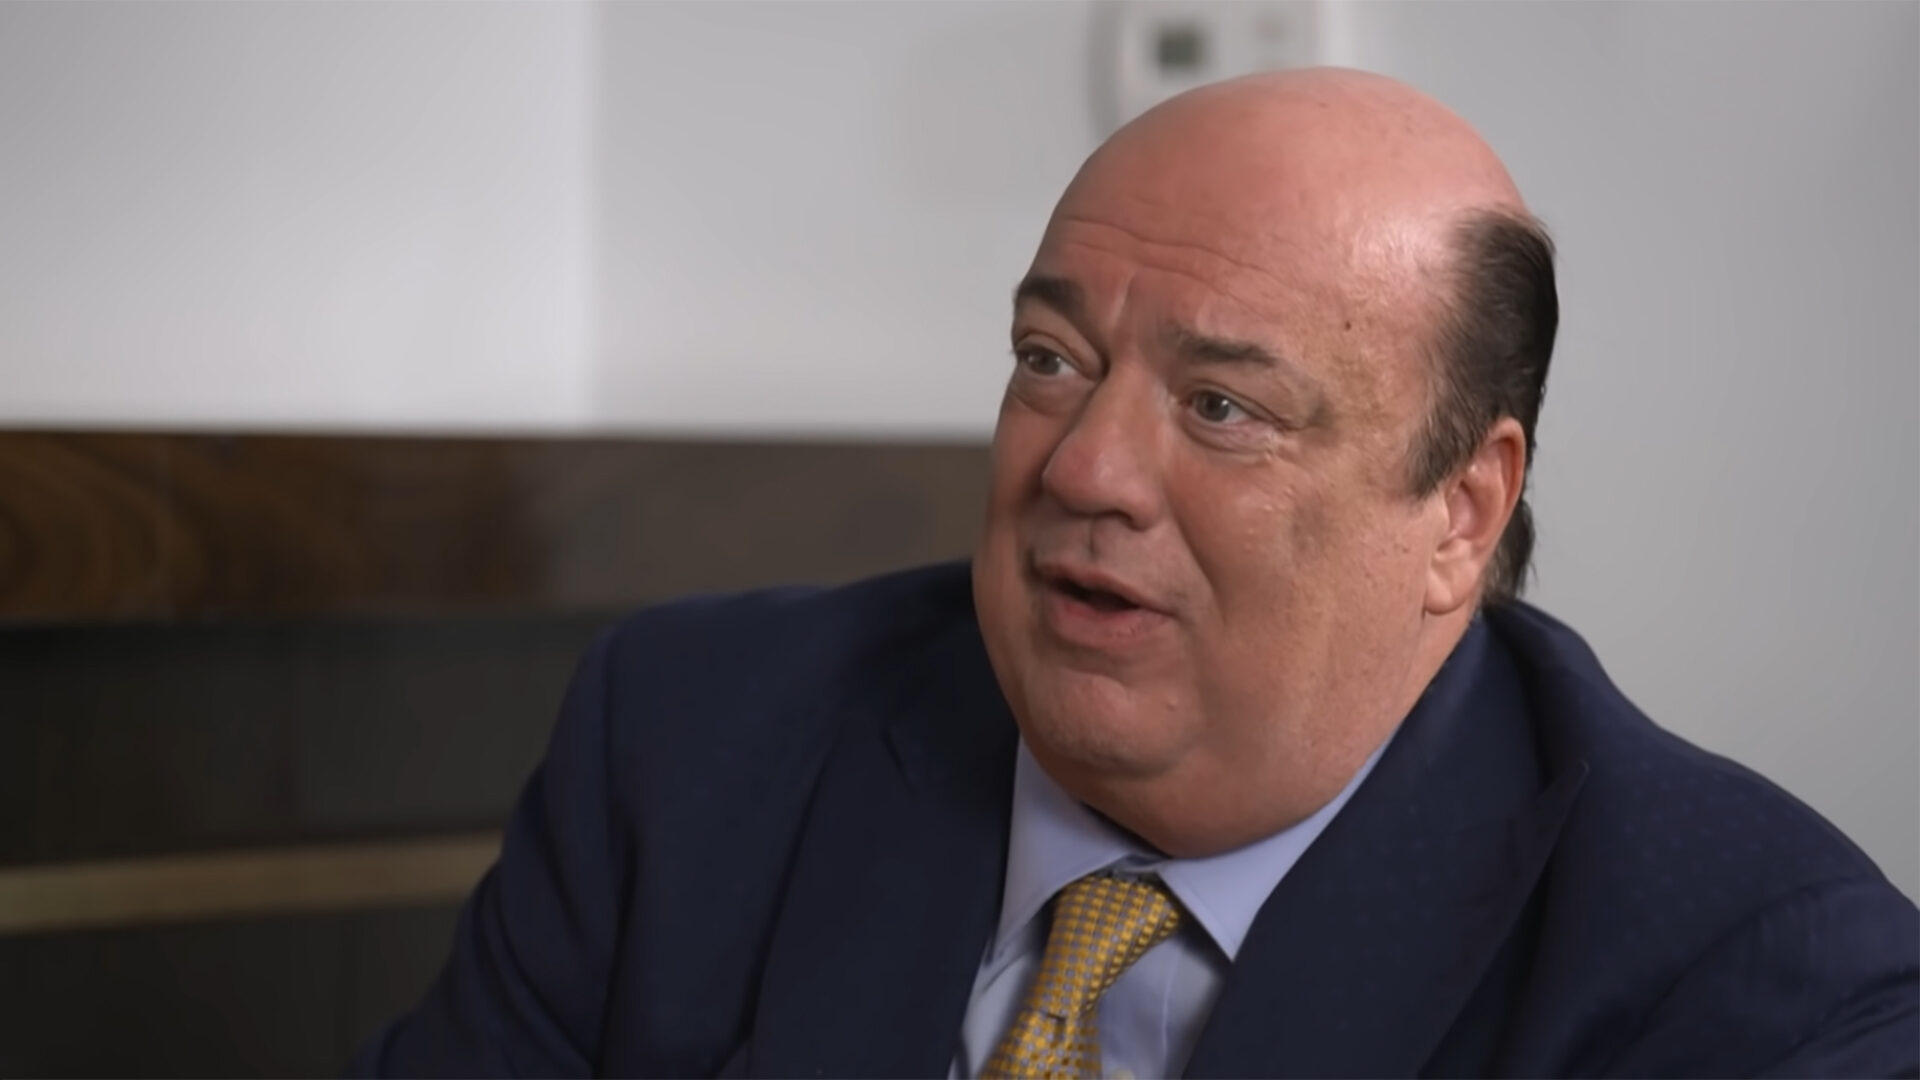 Paul Heyman Responds To The News Of WWE Holding Extreme Rules 2022 In Philadelphia